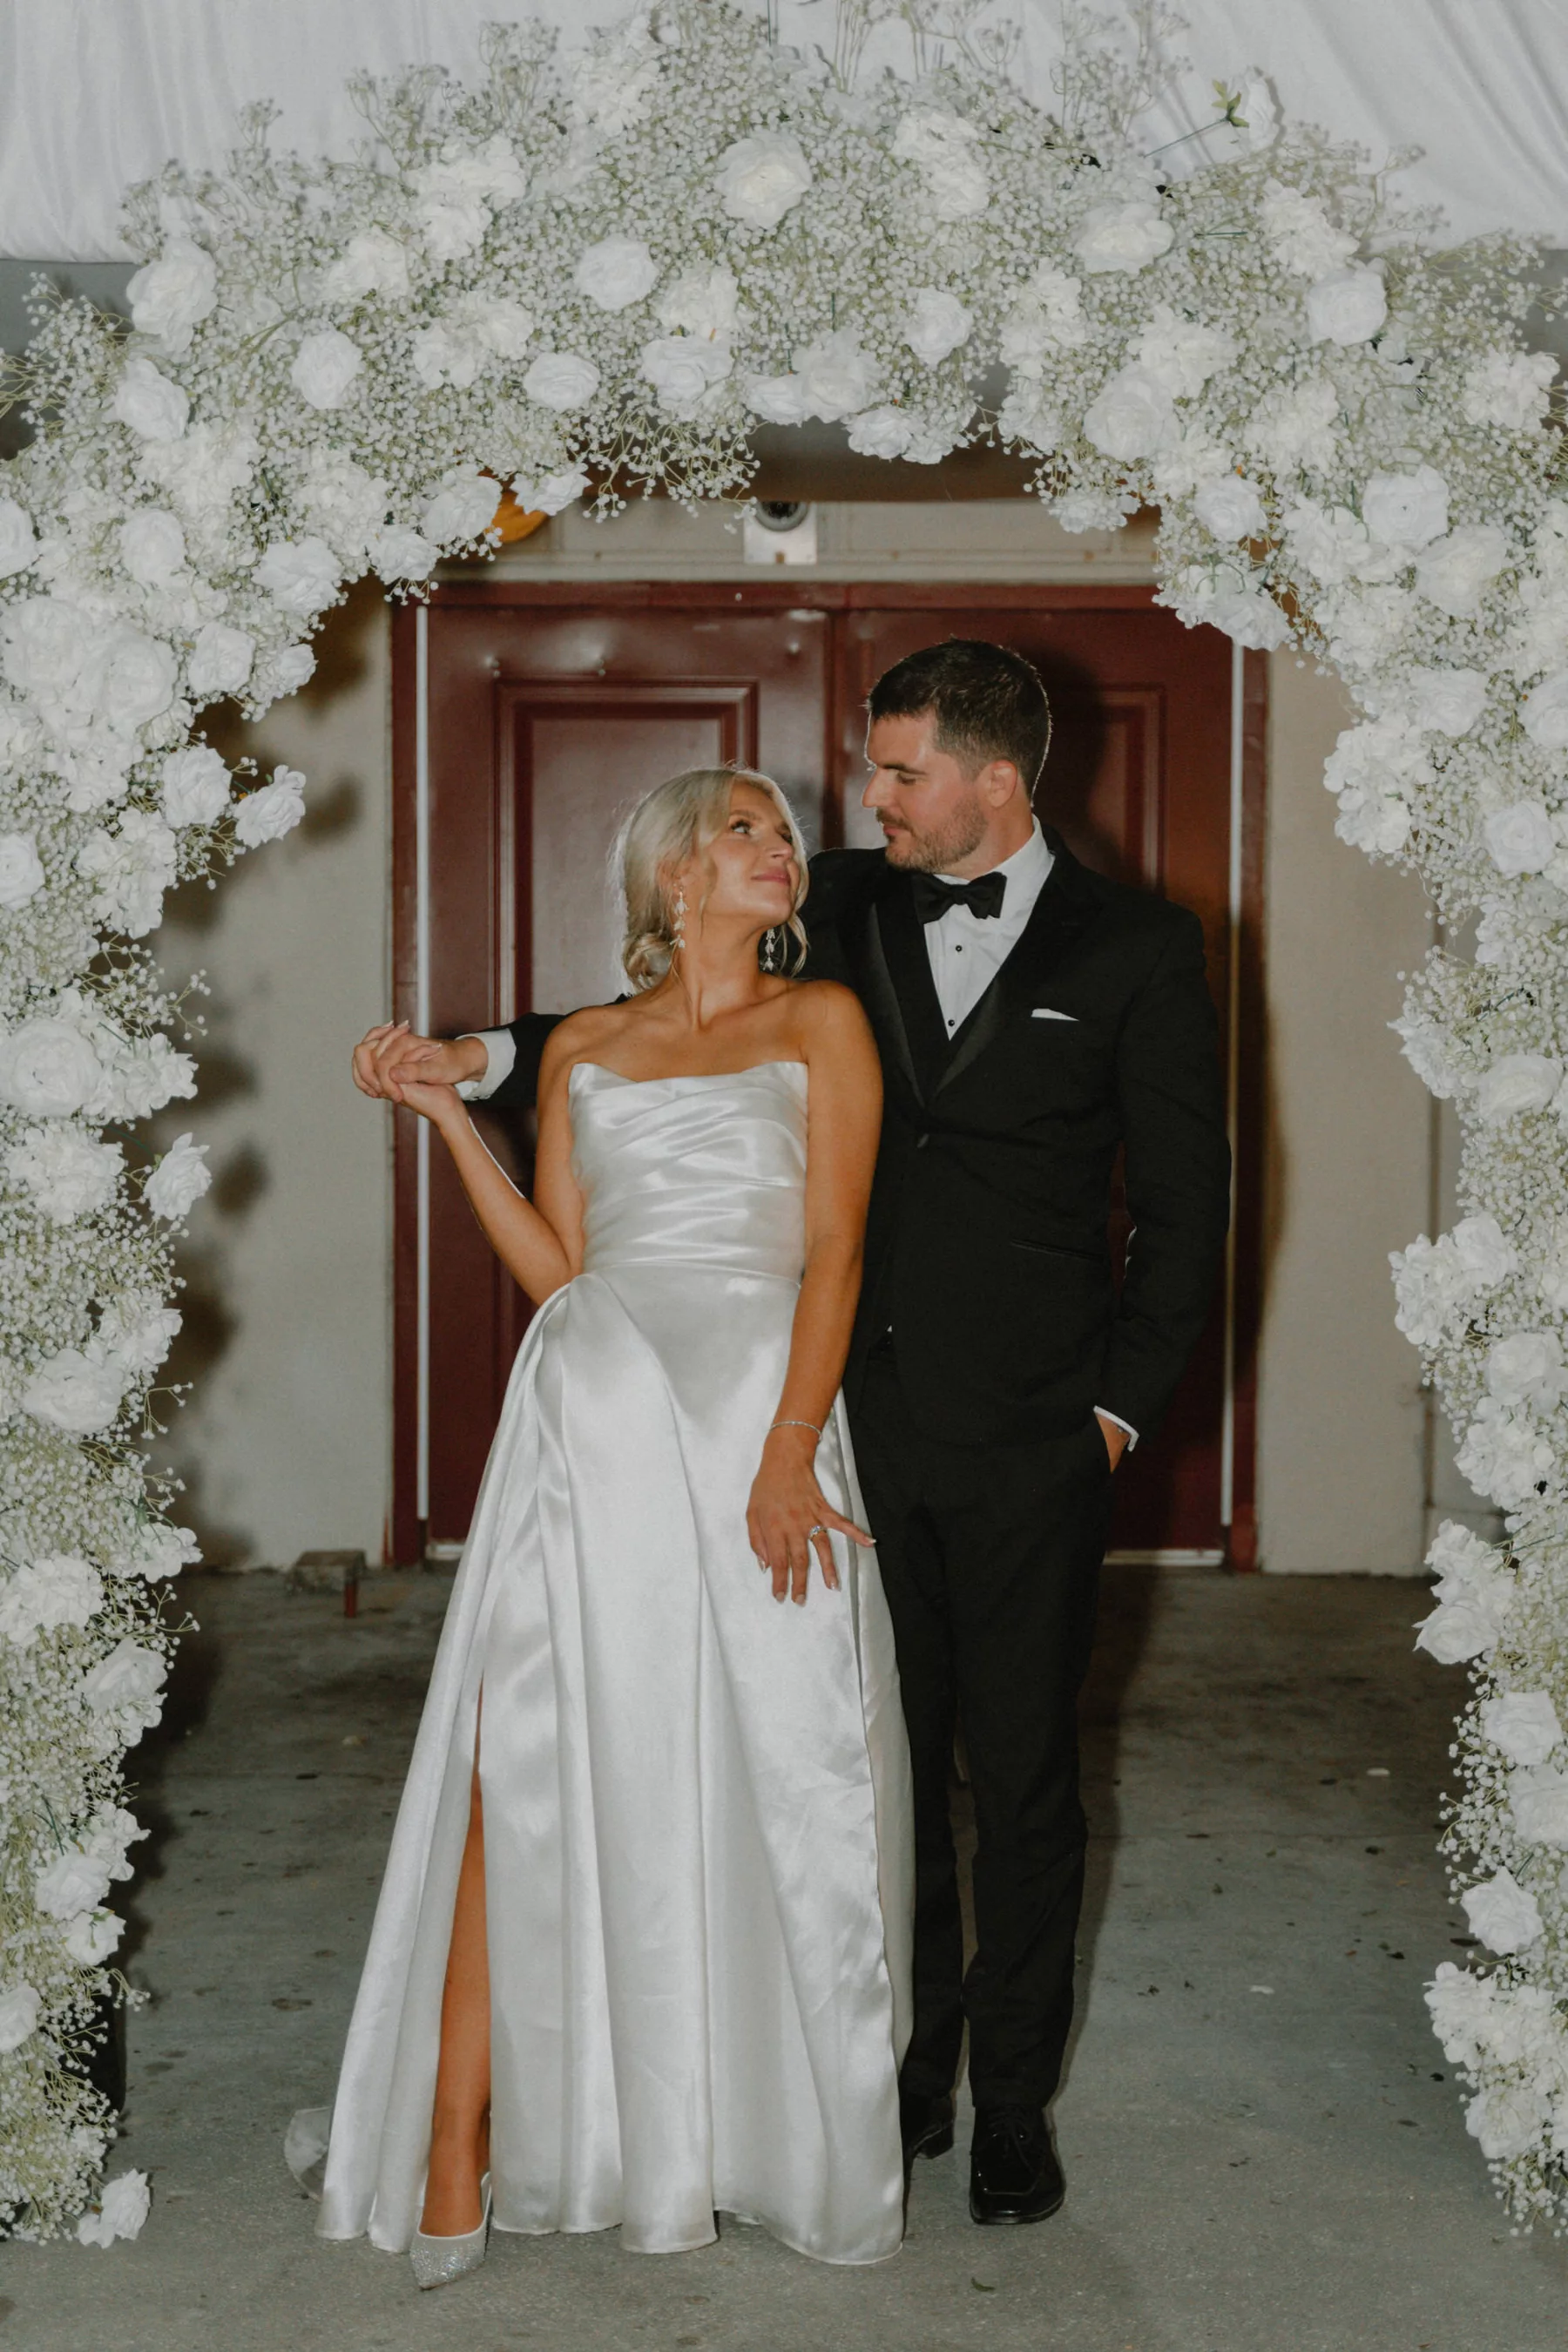 White Rose and Baby's Breath Italian Inspired Wedding Reception Arch Ideas | Classic White Strapless A-Line Ballgown Pavane Couture Wedding Dress Inspiration